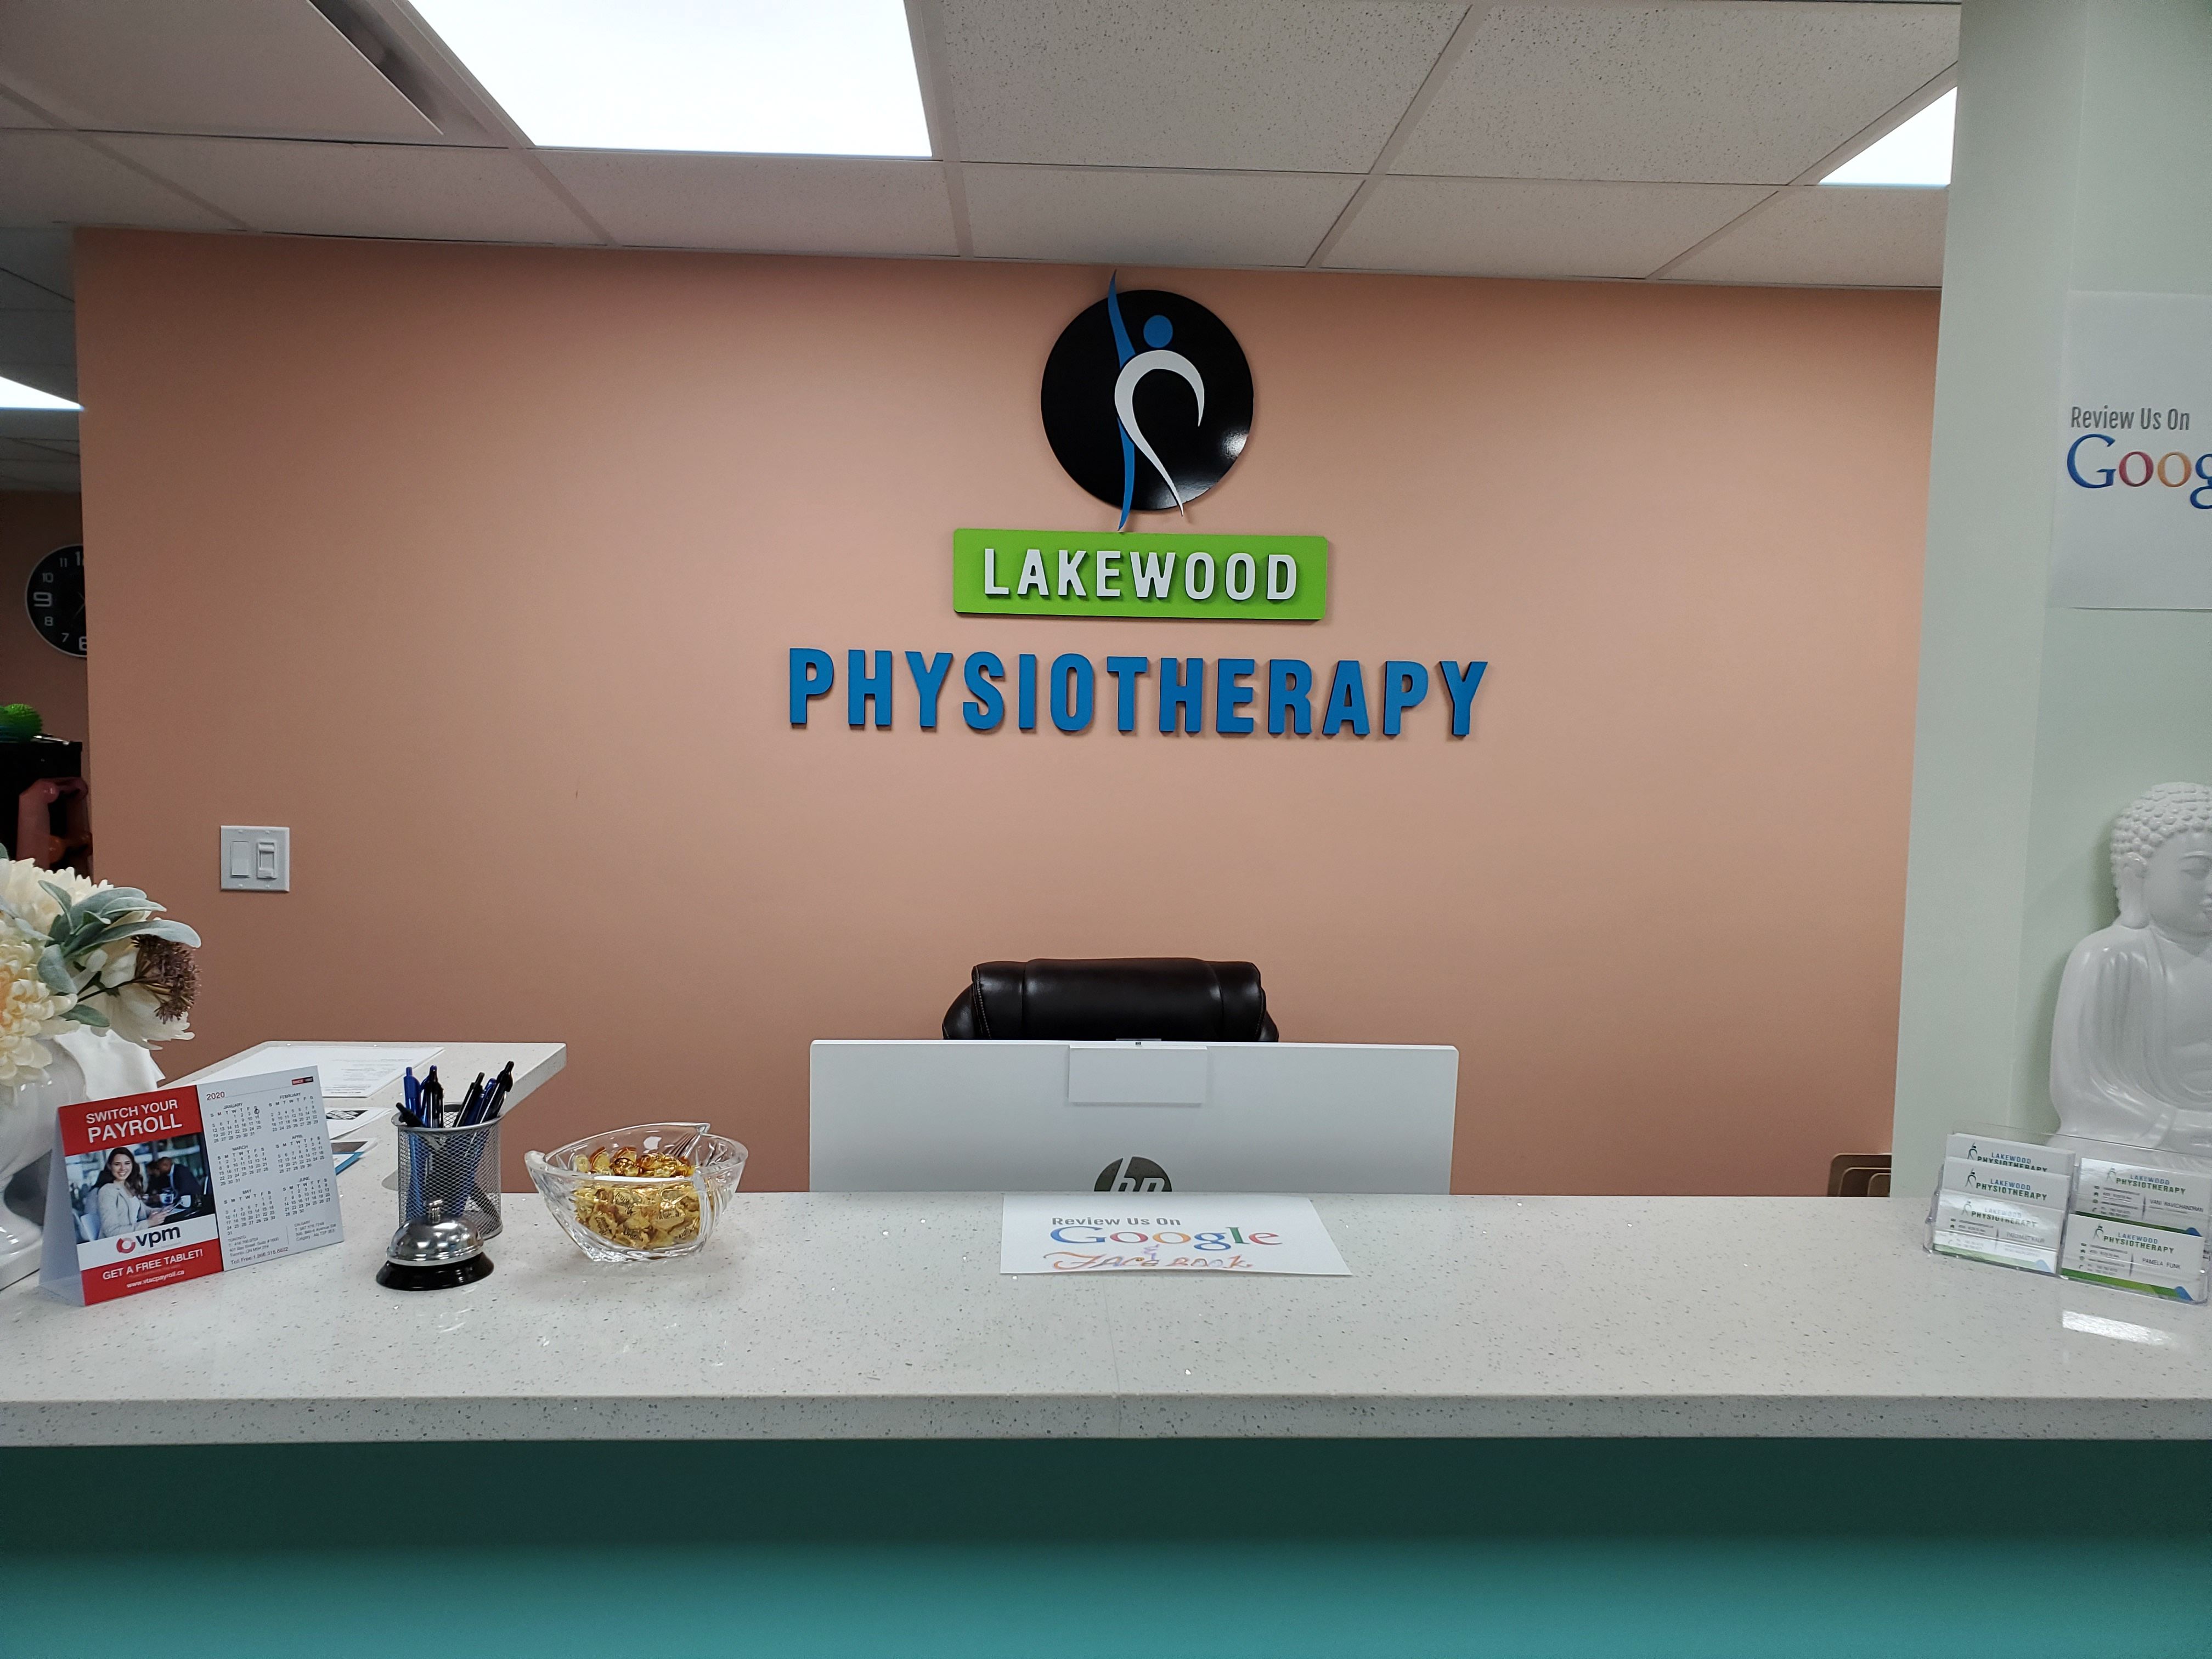 Lakewood Physiotherapy